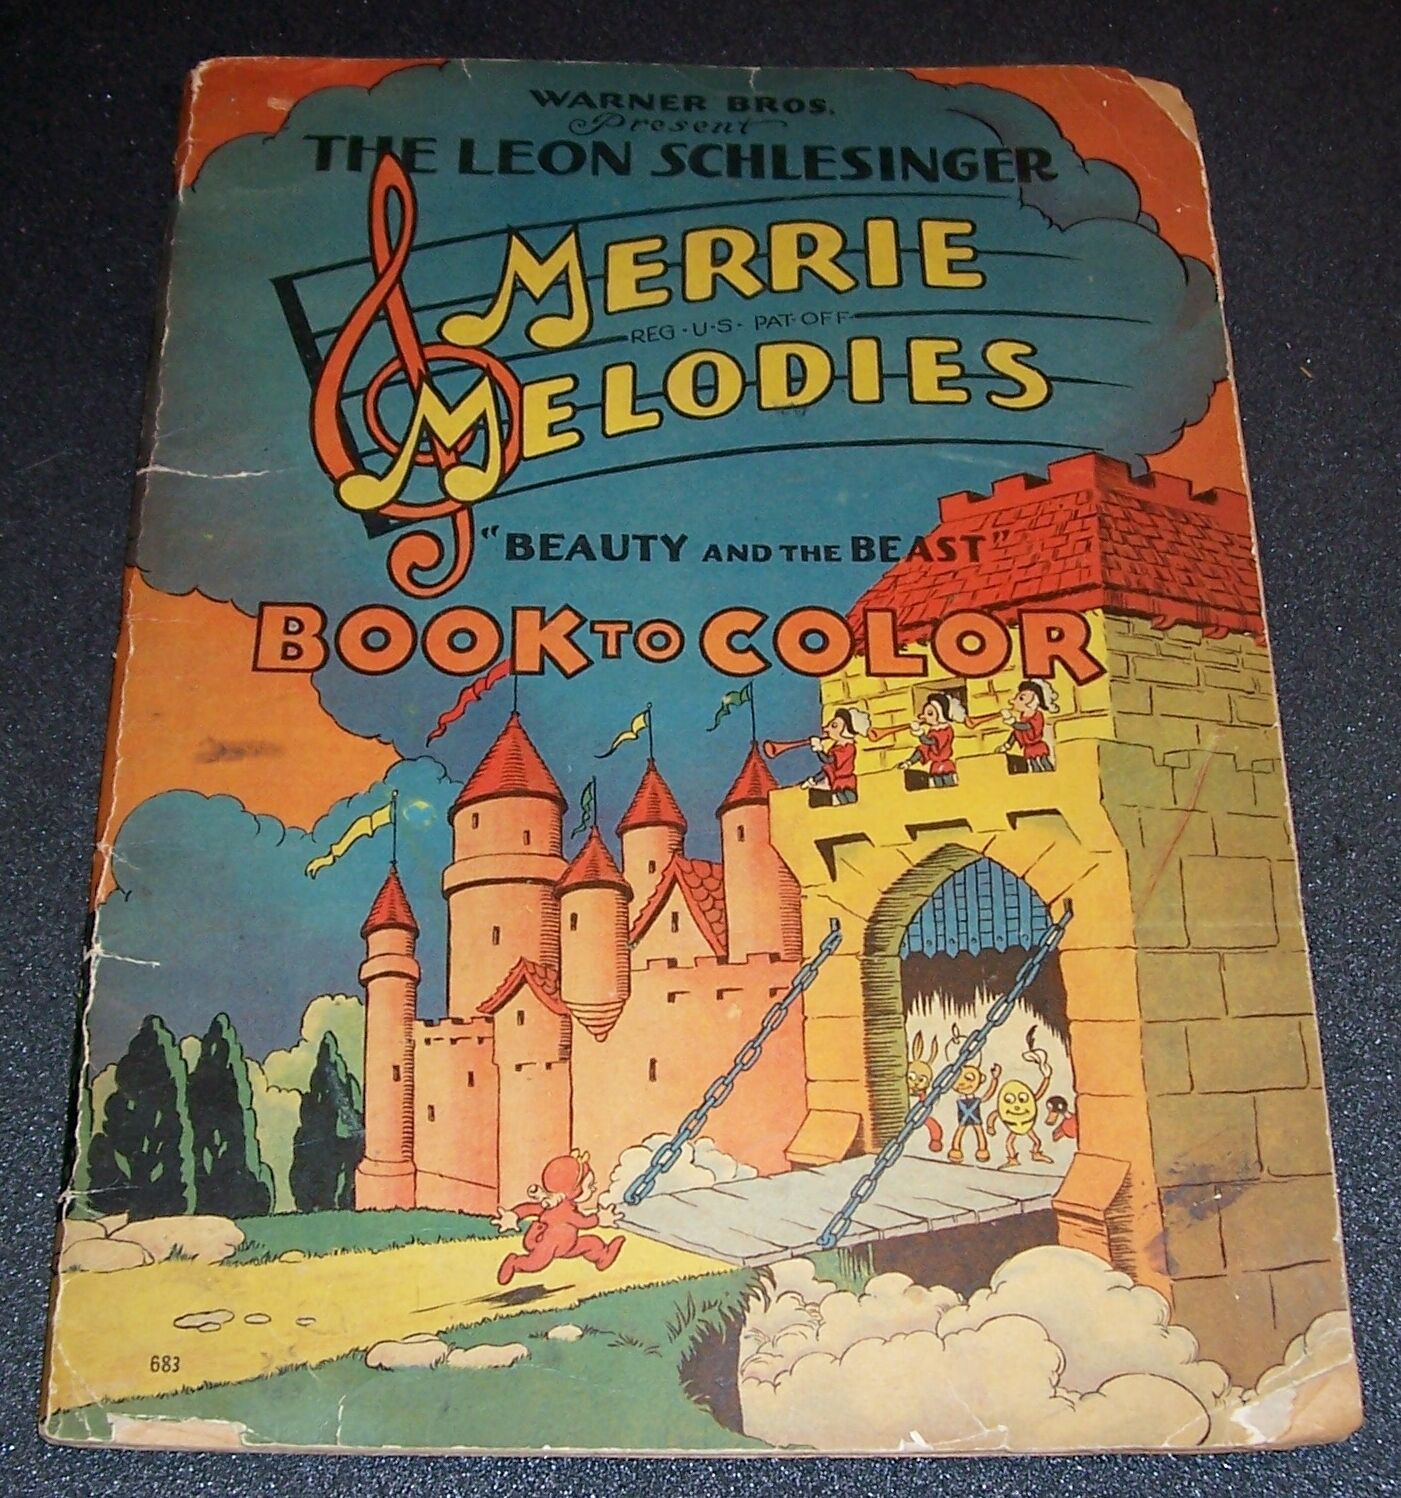 RARE UNUSED 1935 Merry Melodies Color Book BEAUTY and the BEAST 683 WARNER BROS